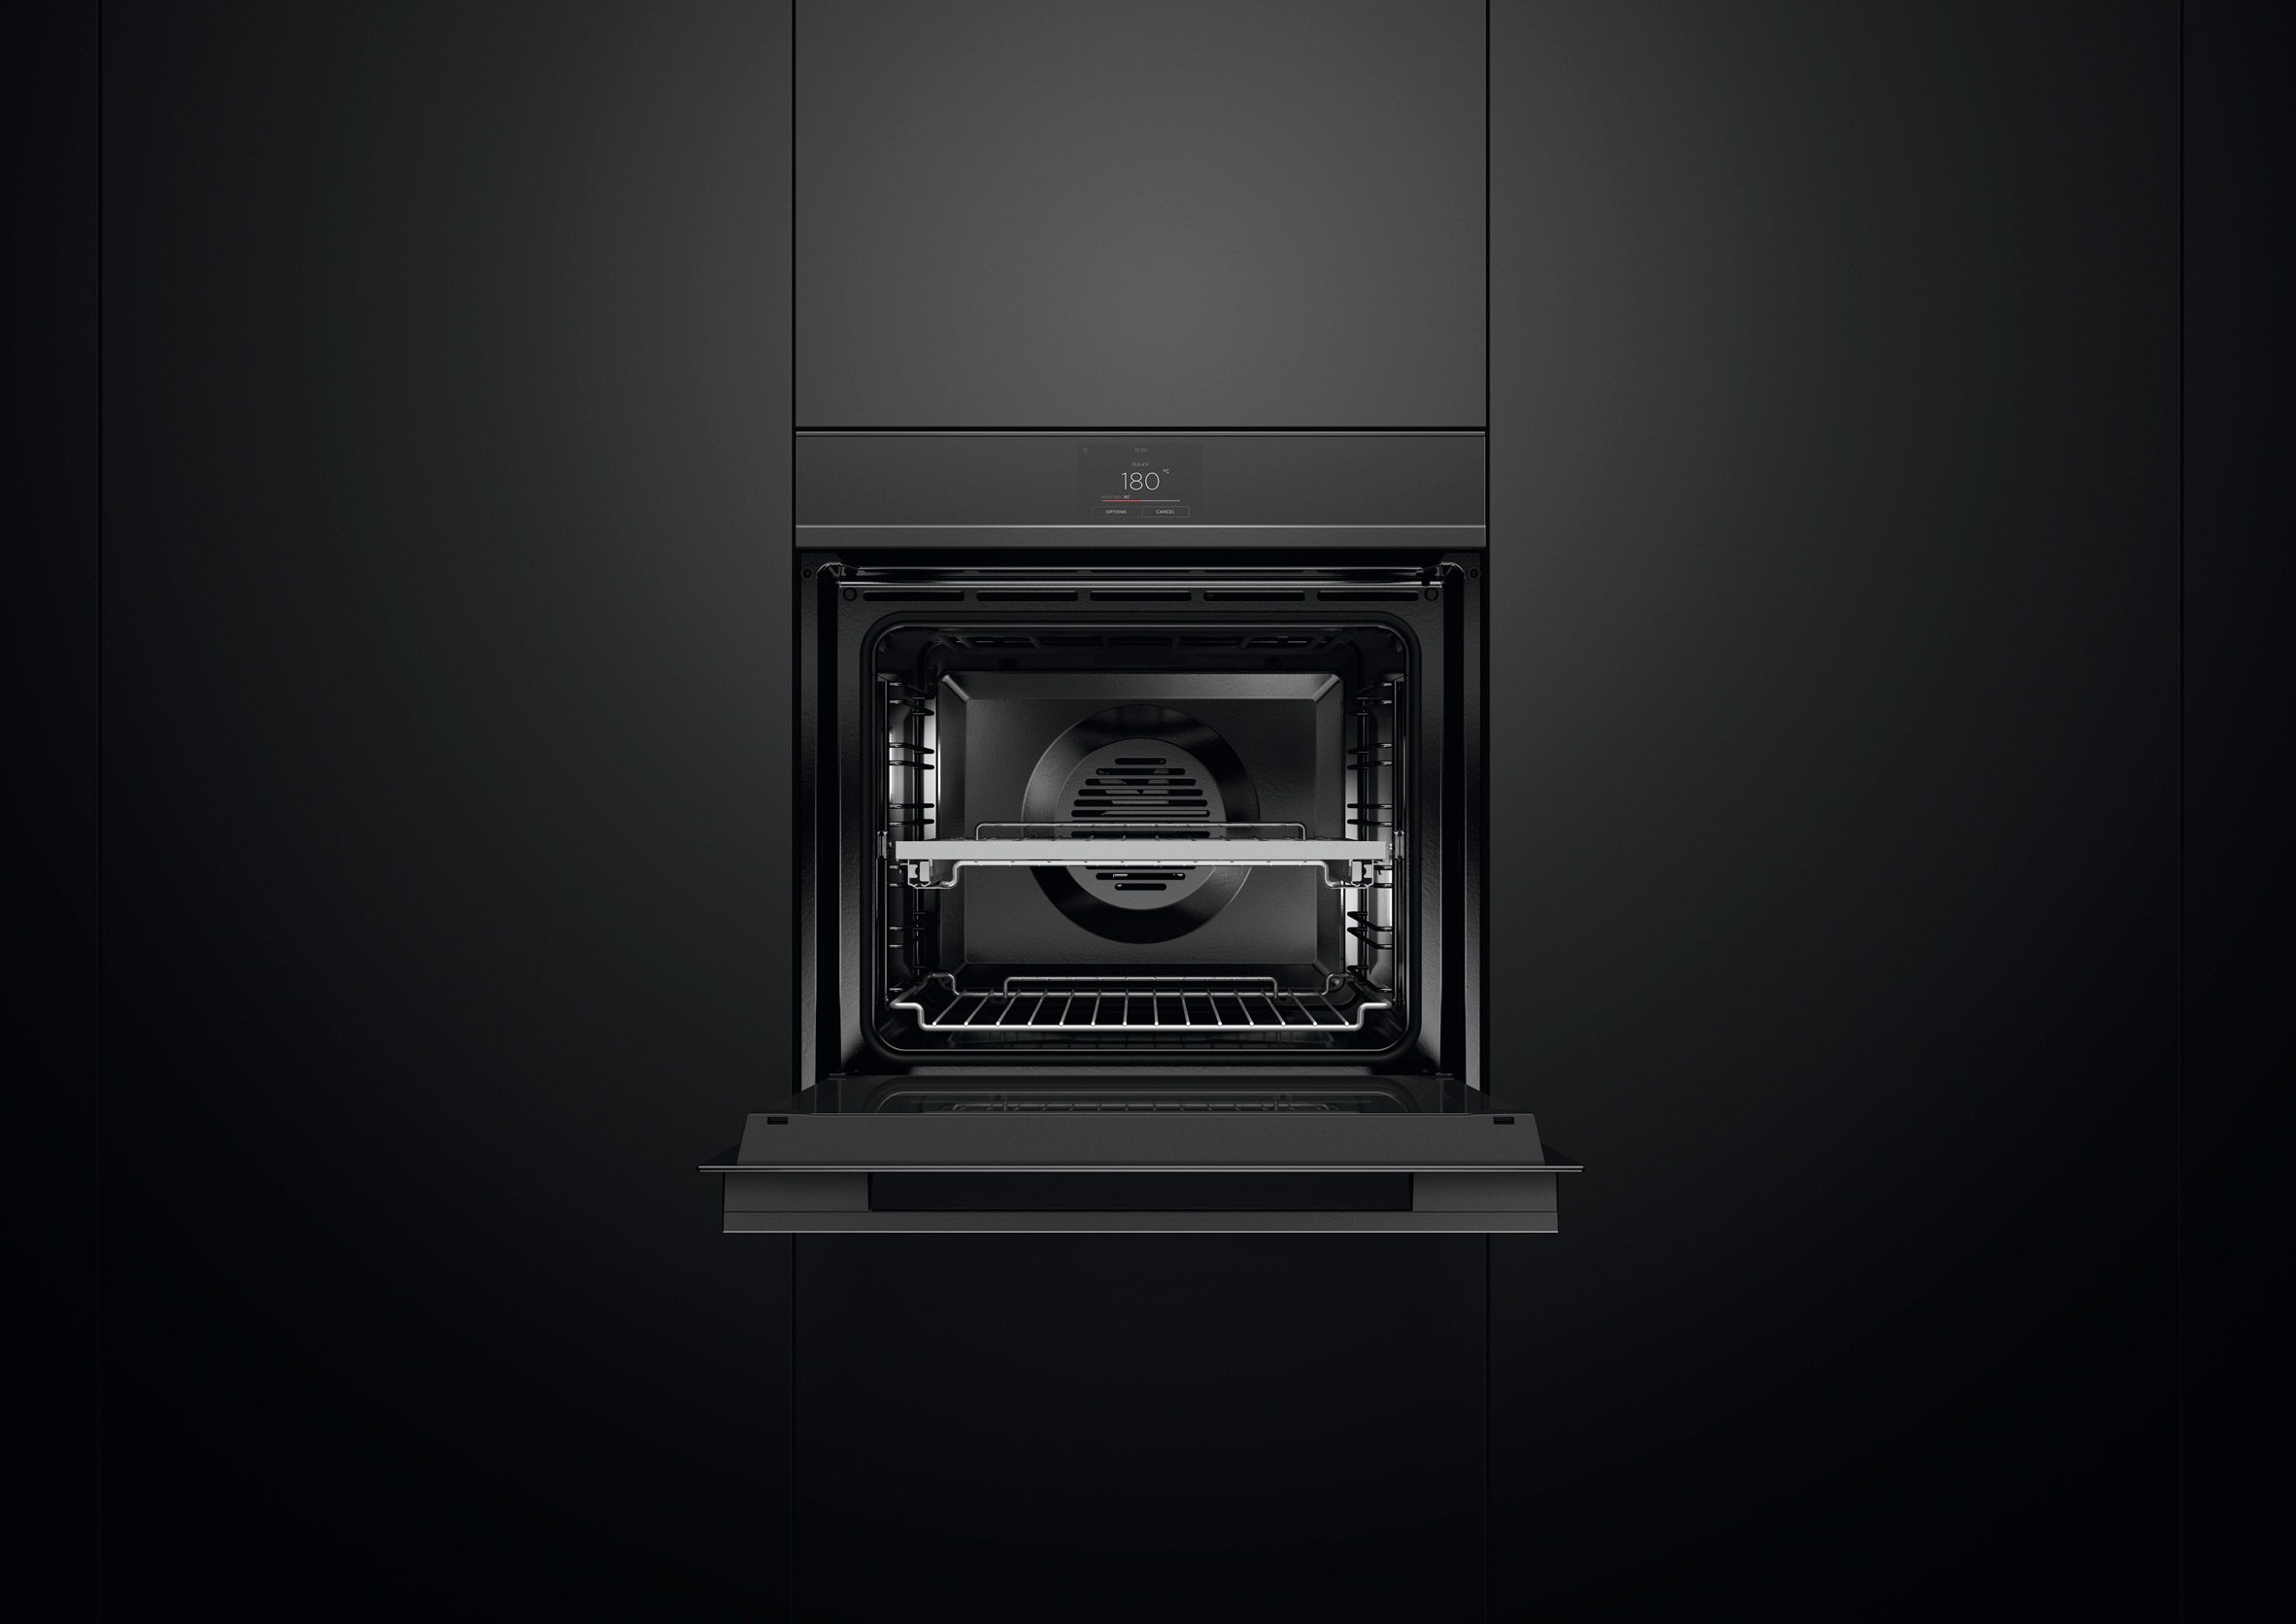 Fisher & Paykel's touch screen oven in black